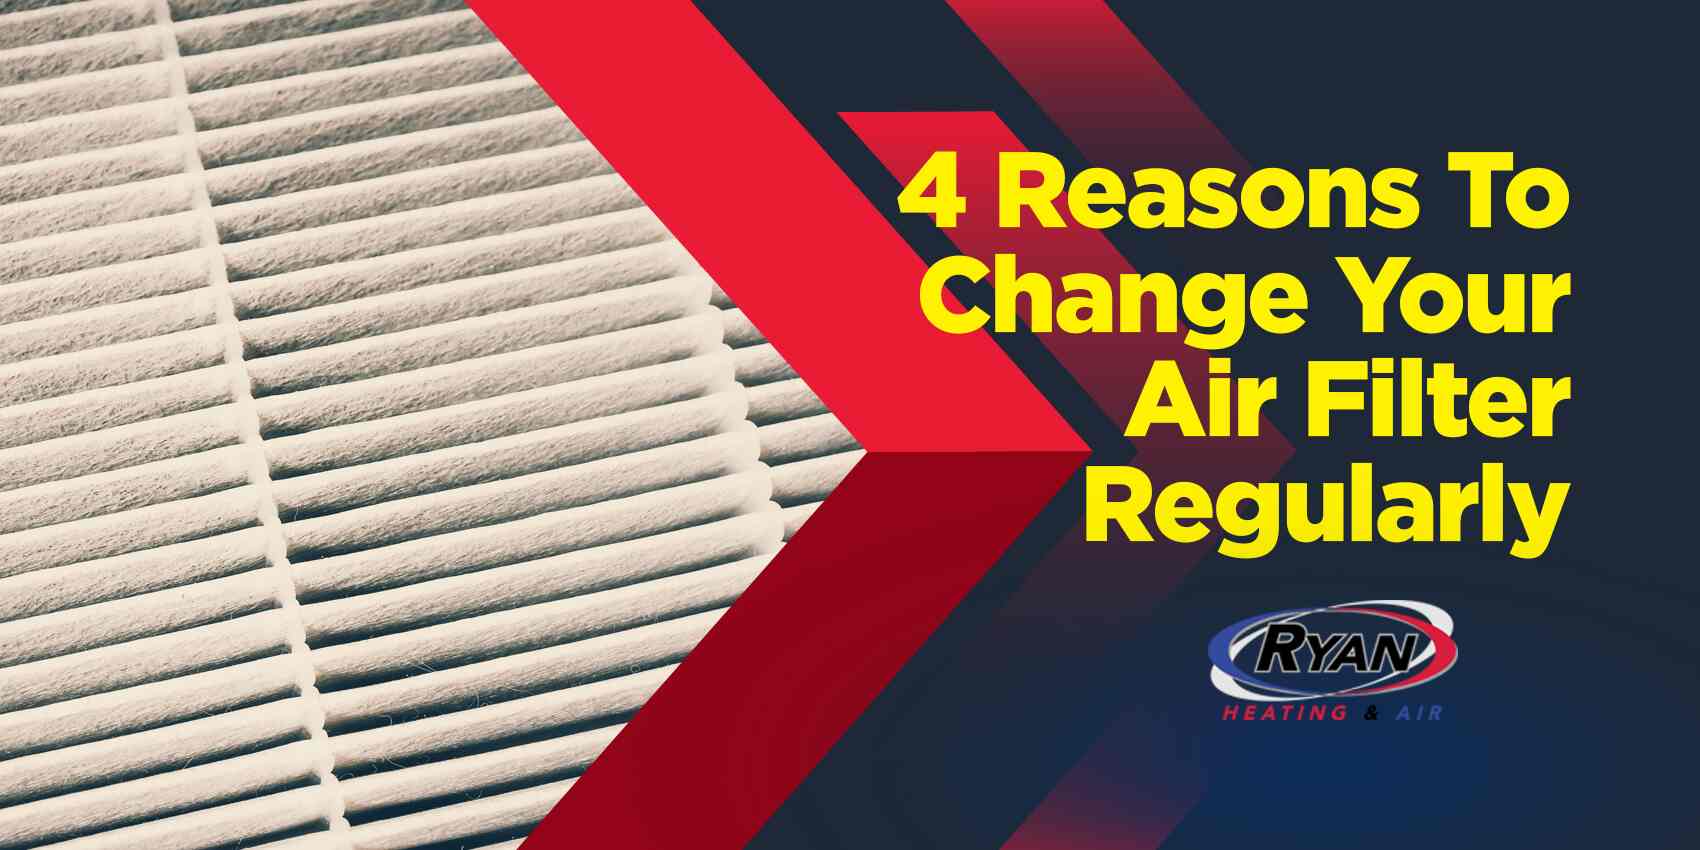 4 Reasons to Change Your Air Filter Regularly